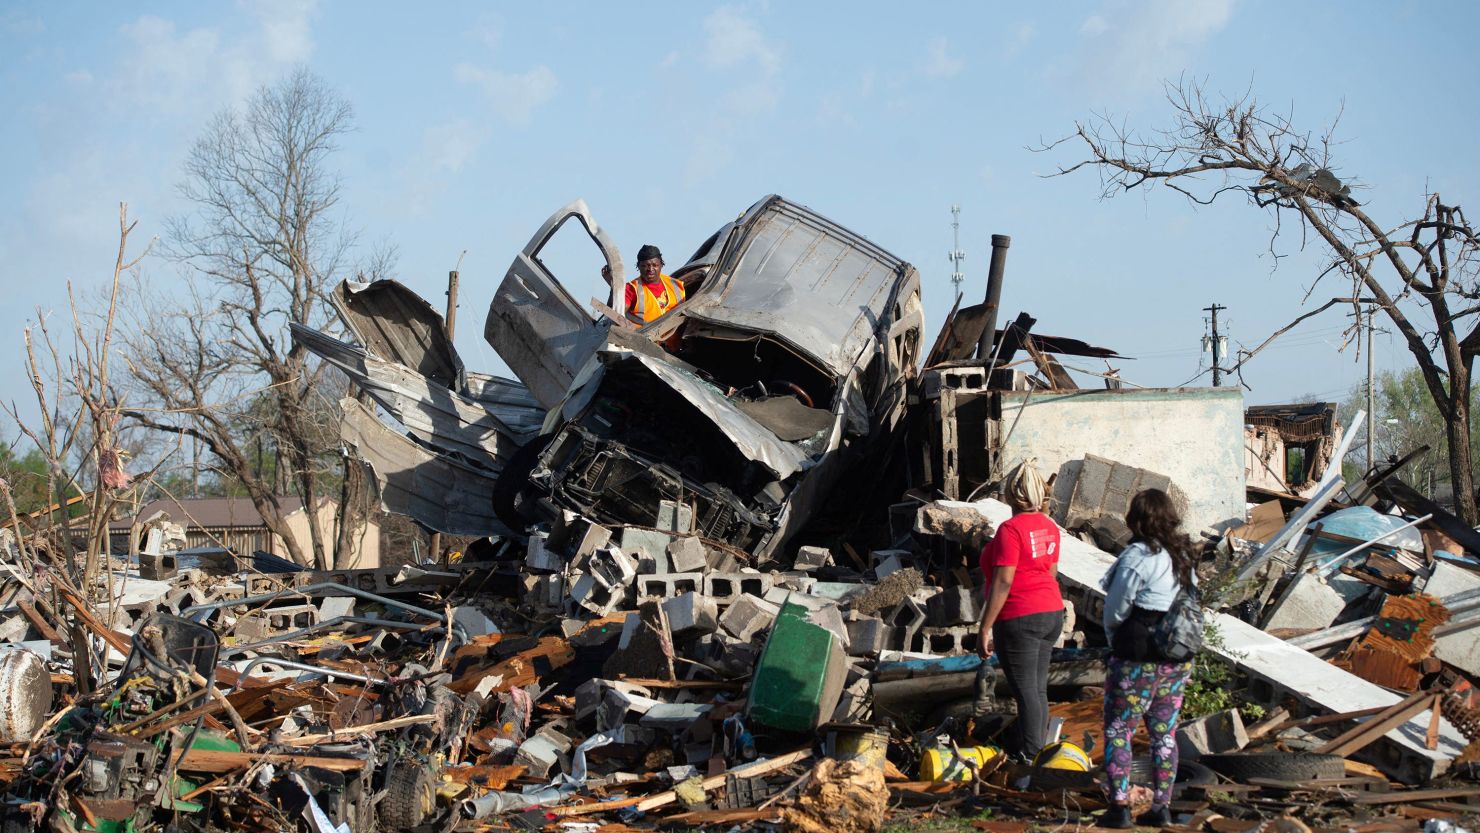 A man tries to salvage what he can from his mother's boyfriend's vehicle, as his mother and girlfriend watch, after a tornado cut through their small Delta town the night before in Rolling Fork, Mississippi, U.S. March 25, 2023.

 